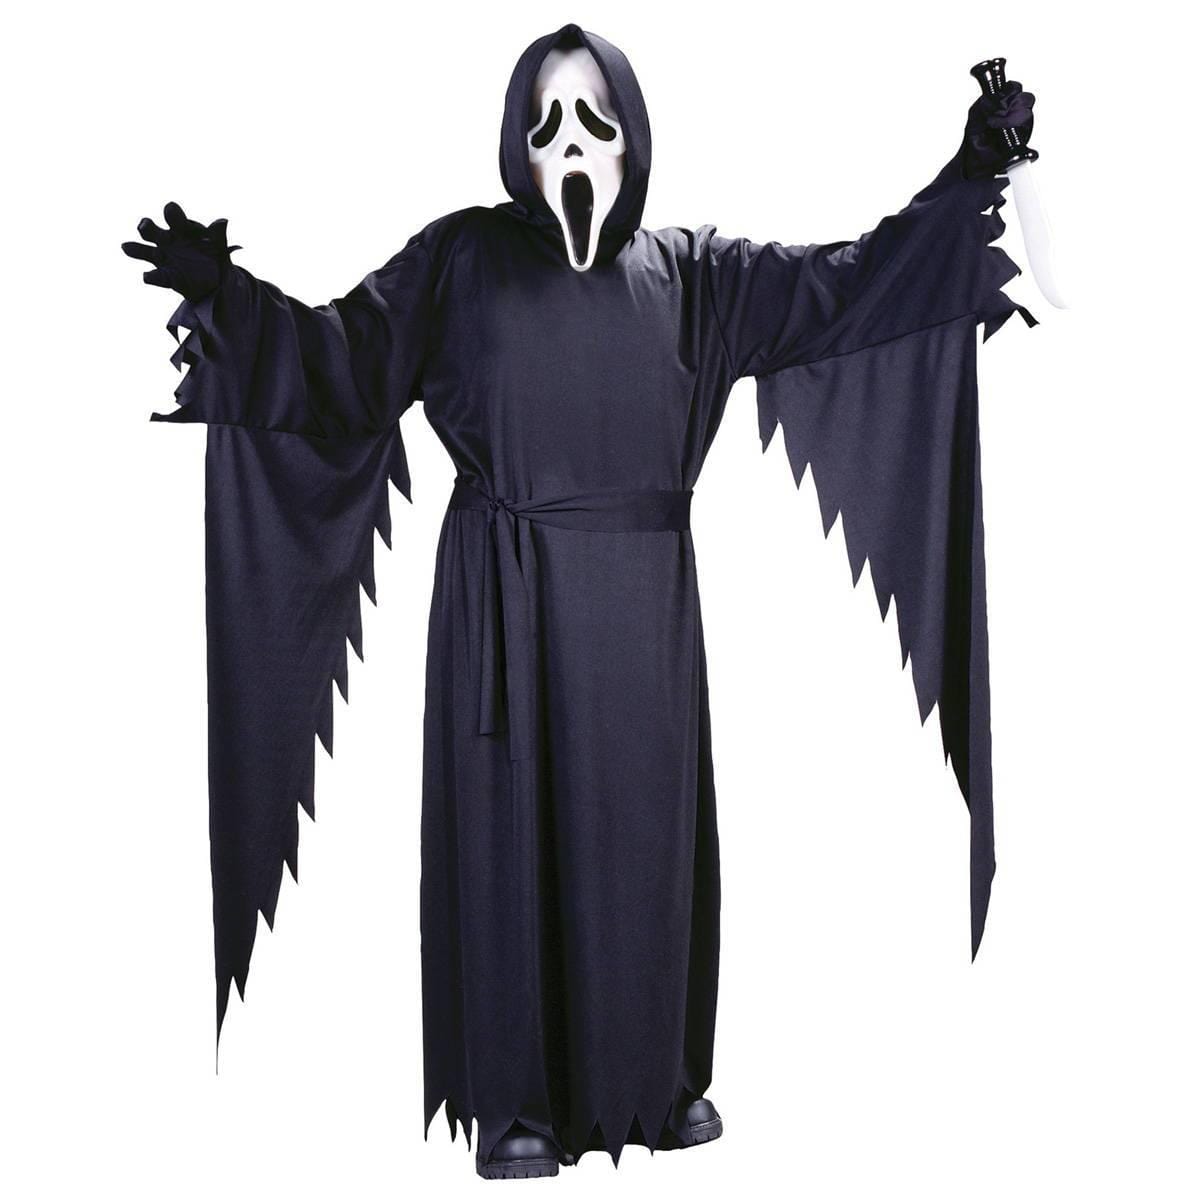 Buy Costumes Ghostface Costume for Teens, Scream sold at Party Expert